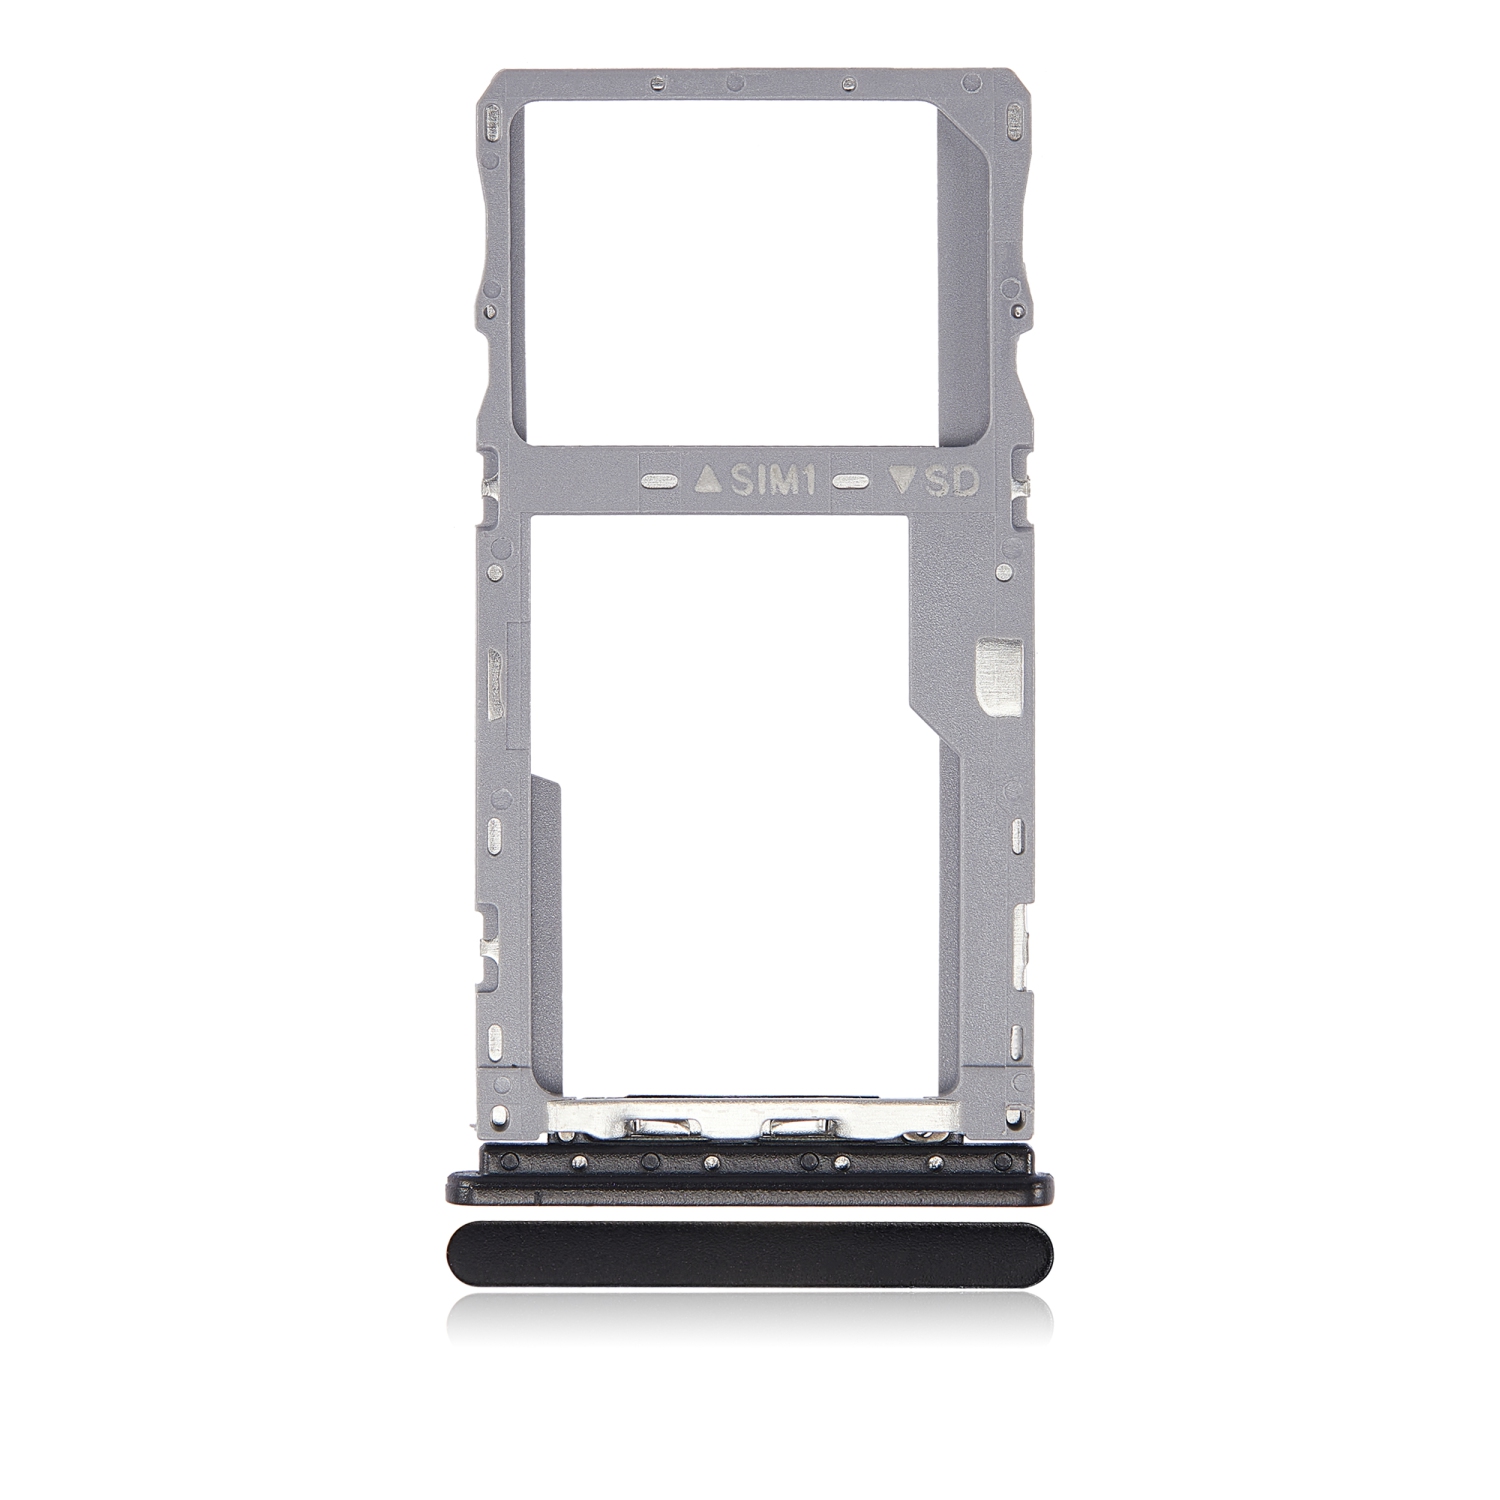 Replacement Single Sim Card Tray Compatible For TCL 20 SE (T671H) (Nuit Black)